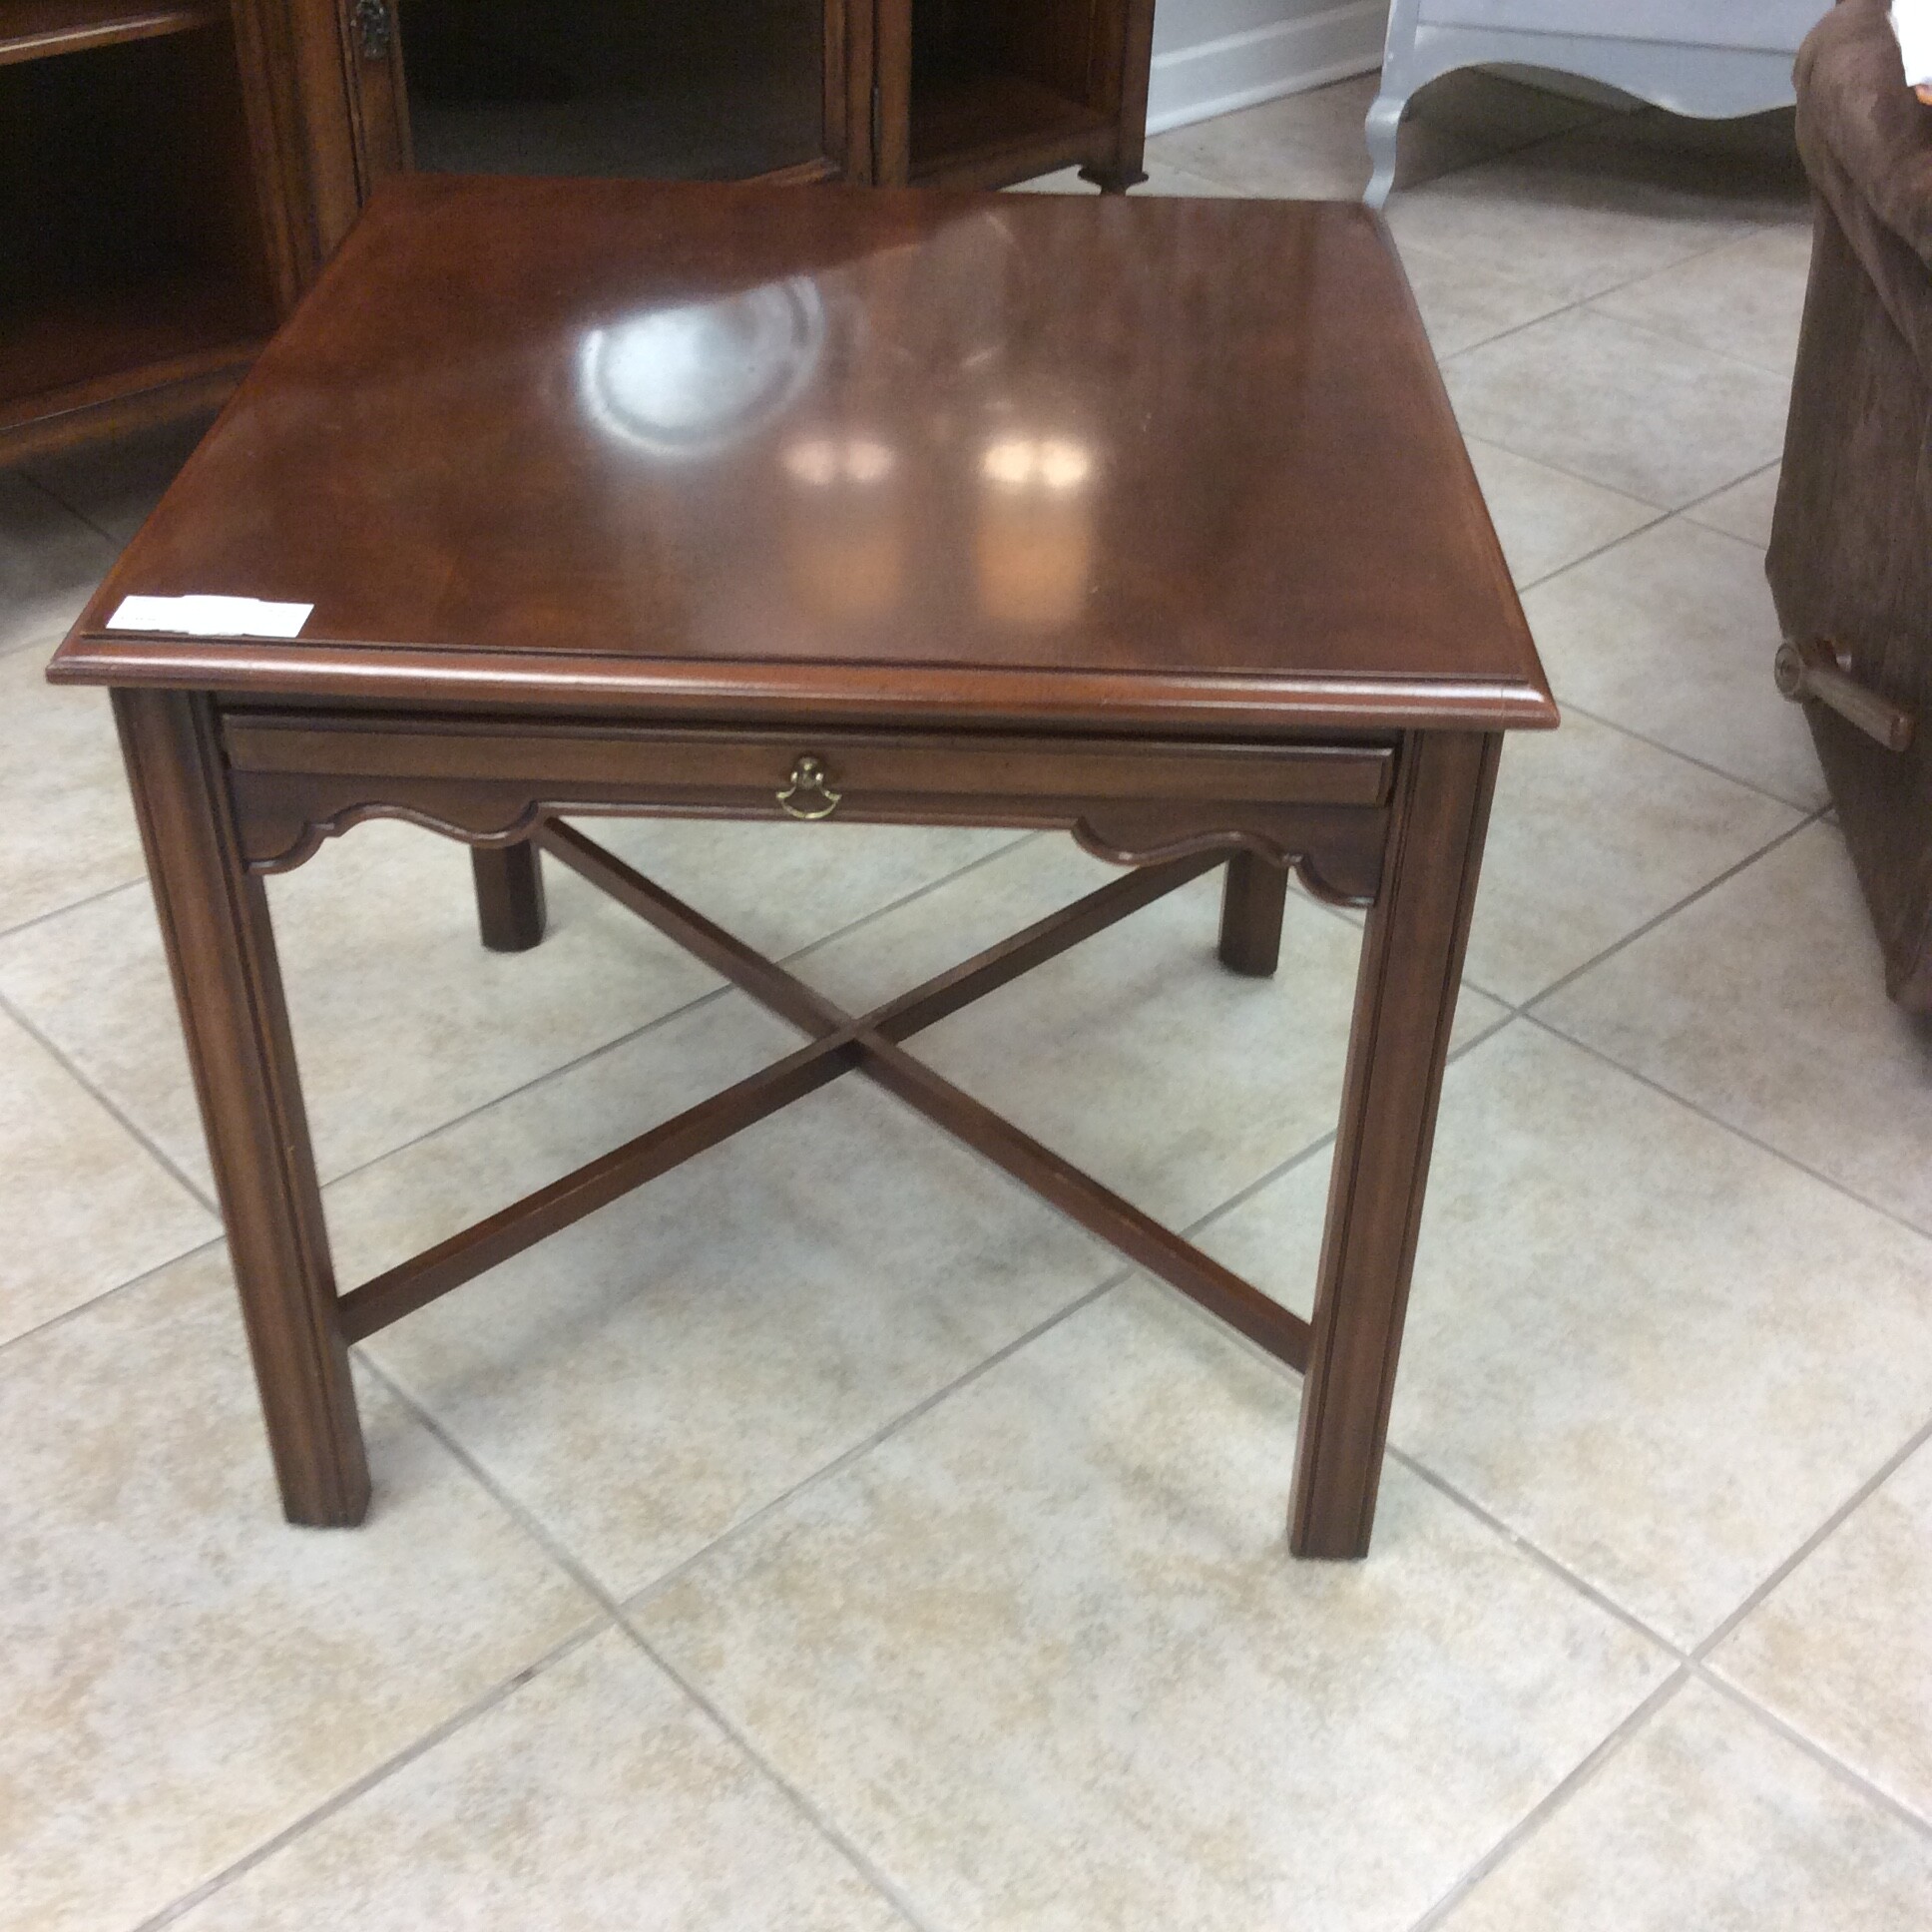 This traditional style Drexel end table has a cherry finish and Marlborough legs.